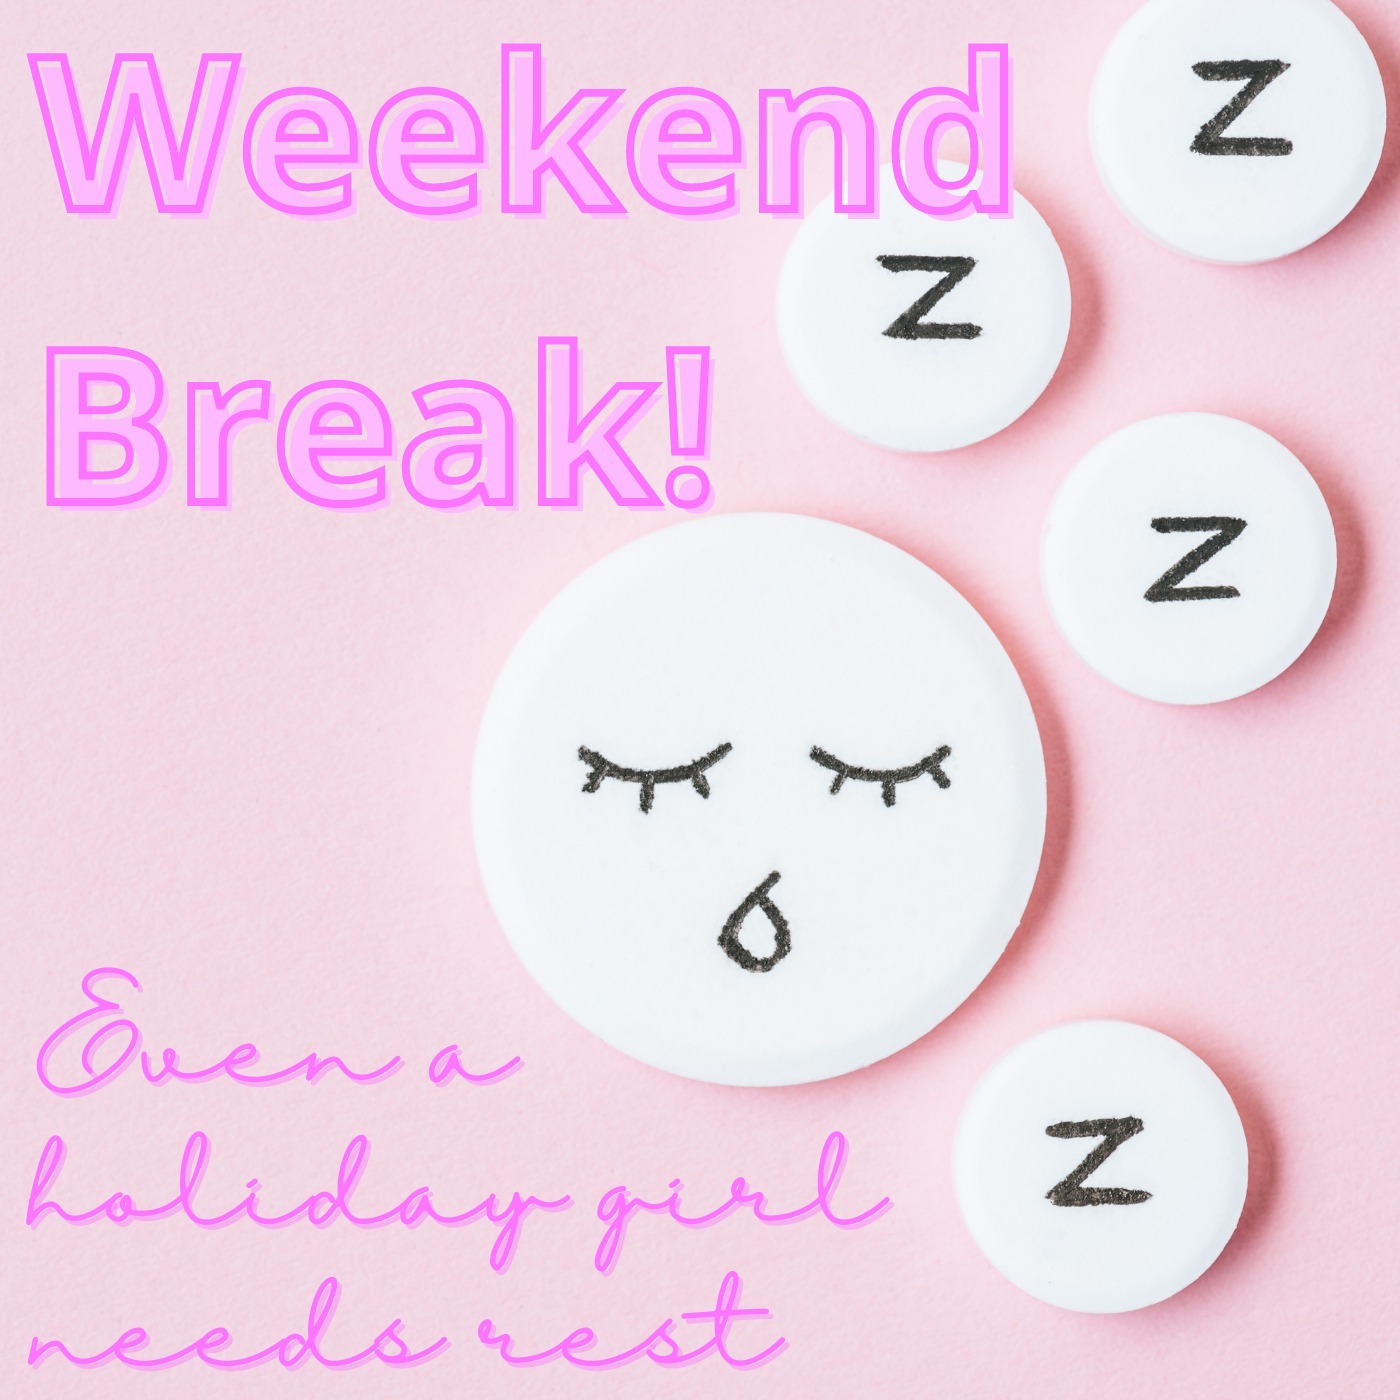 Episode #045 Holiday Girl Weekend Break (Podcast Will Resume on Monday)